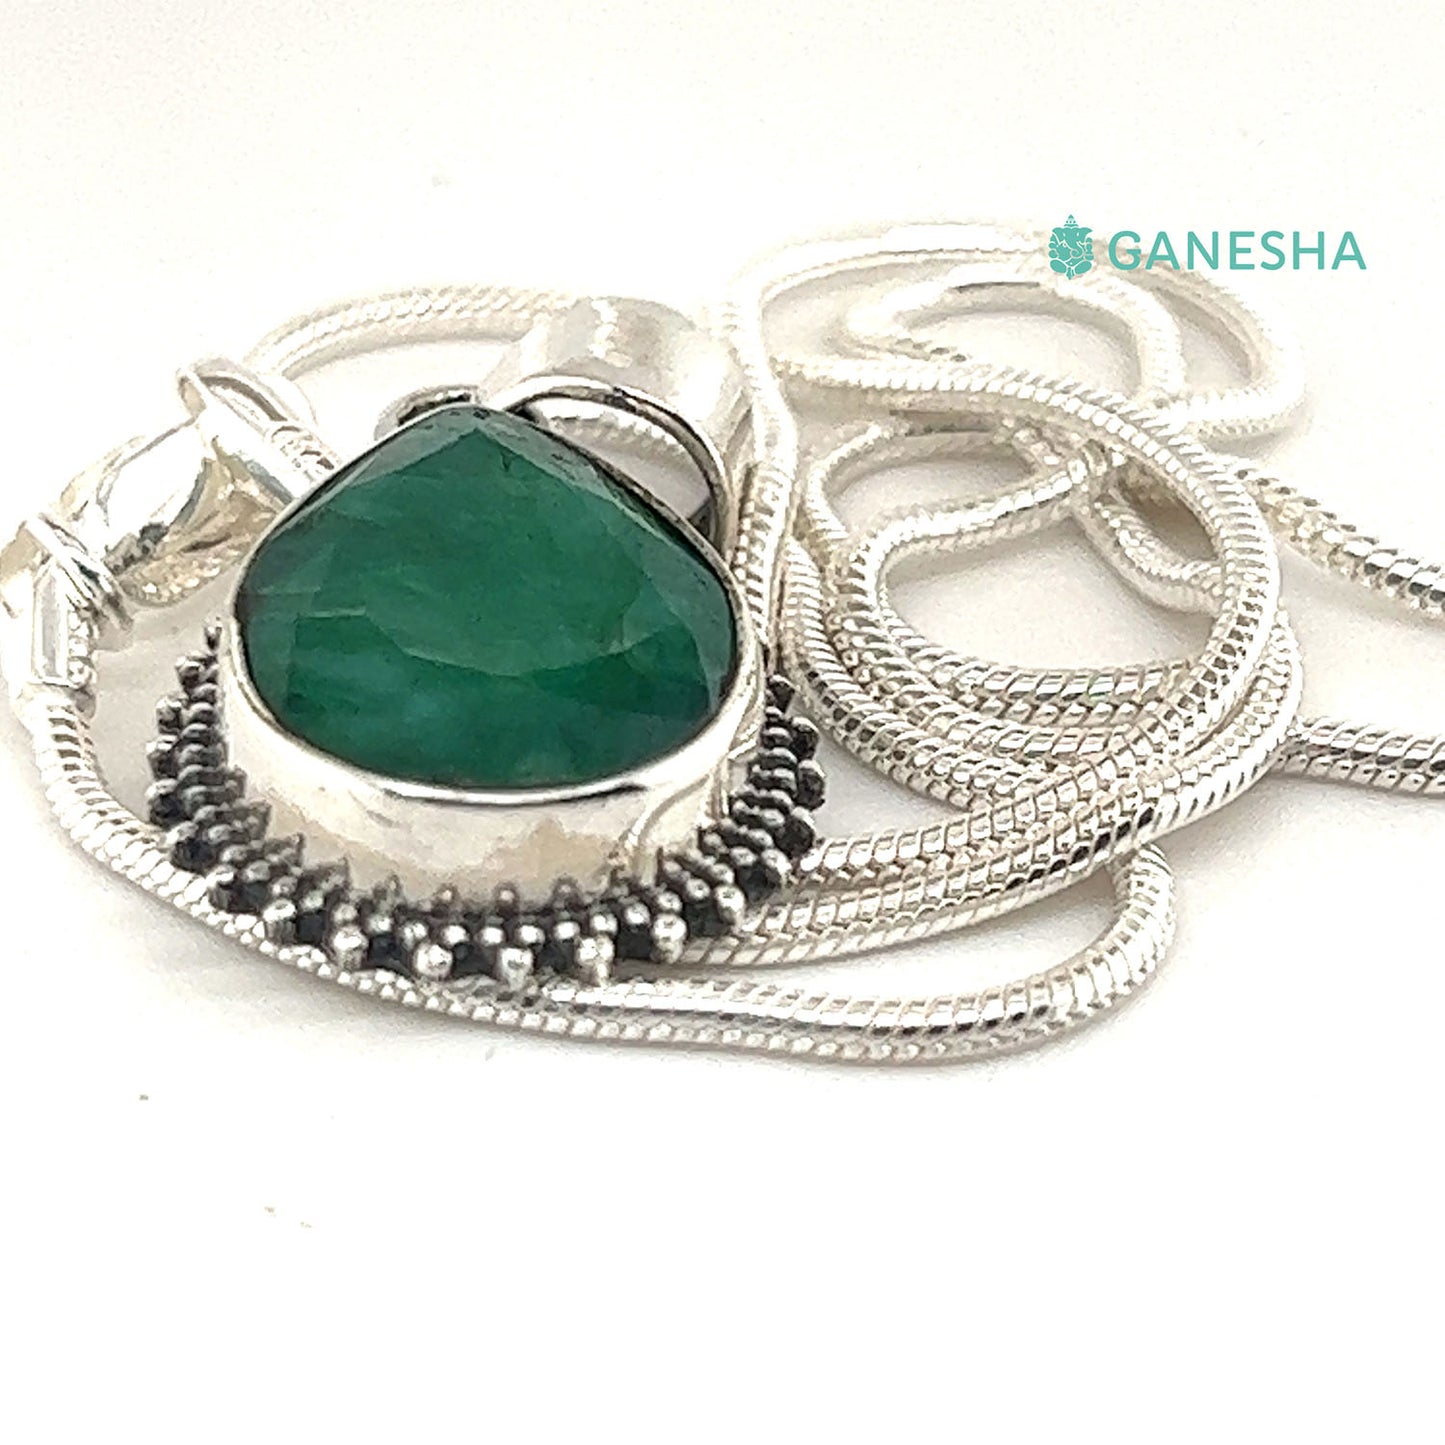 Ganesha Handicrafts, Emerald - 925 Sterling Silver Jewellery Gift Set With Free Chain, 925 Sterling Silver Jewellery Gift Set With Free Chain, Womens stylized Jewellery and  Chain, Green Colour Emerald Silver Jewellery.